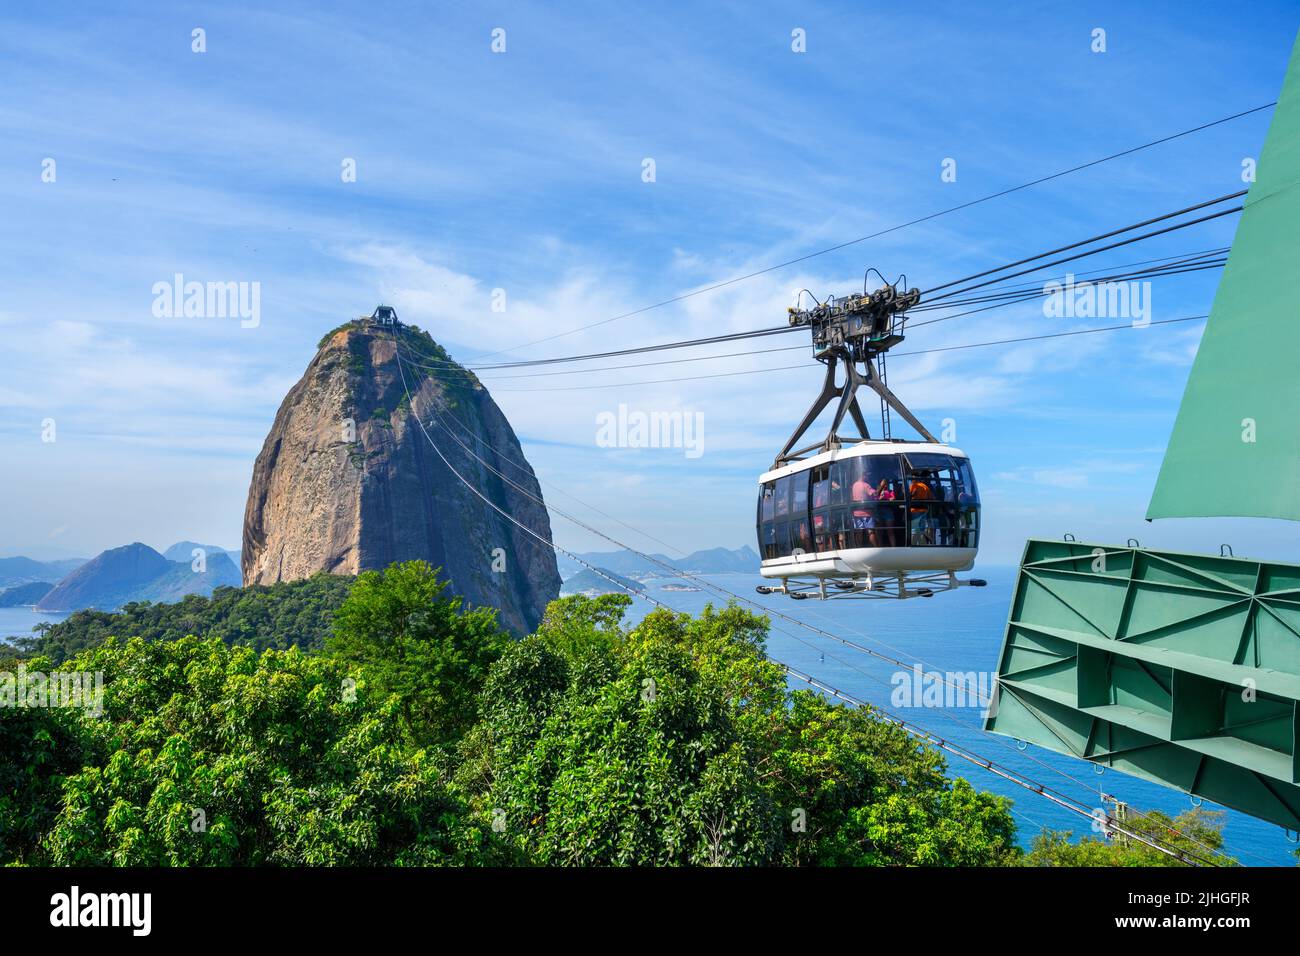 Middle station of the Sugarloaf Cable Car, looking up to Sugarloaf Mountain, Morro da Urca, Sugarloaf Mountain, Rio de Janeiro, Brazil Stock Photo